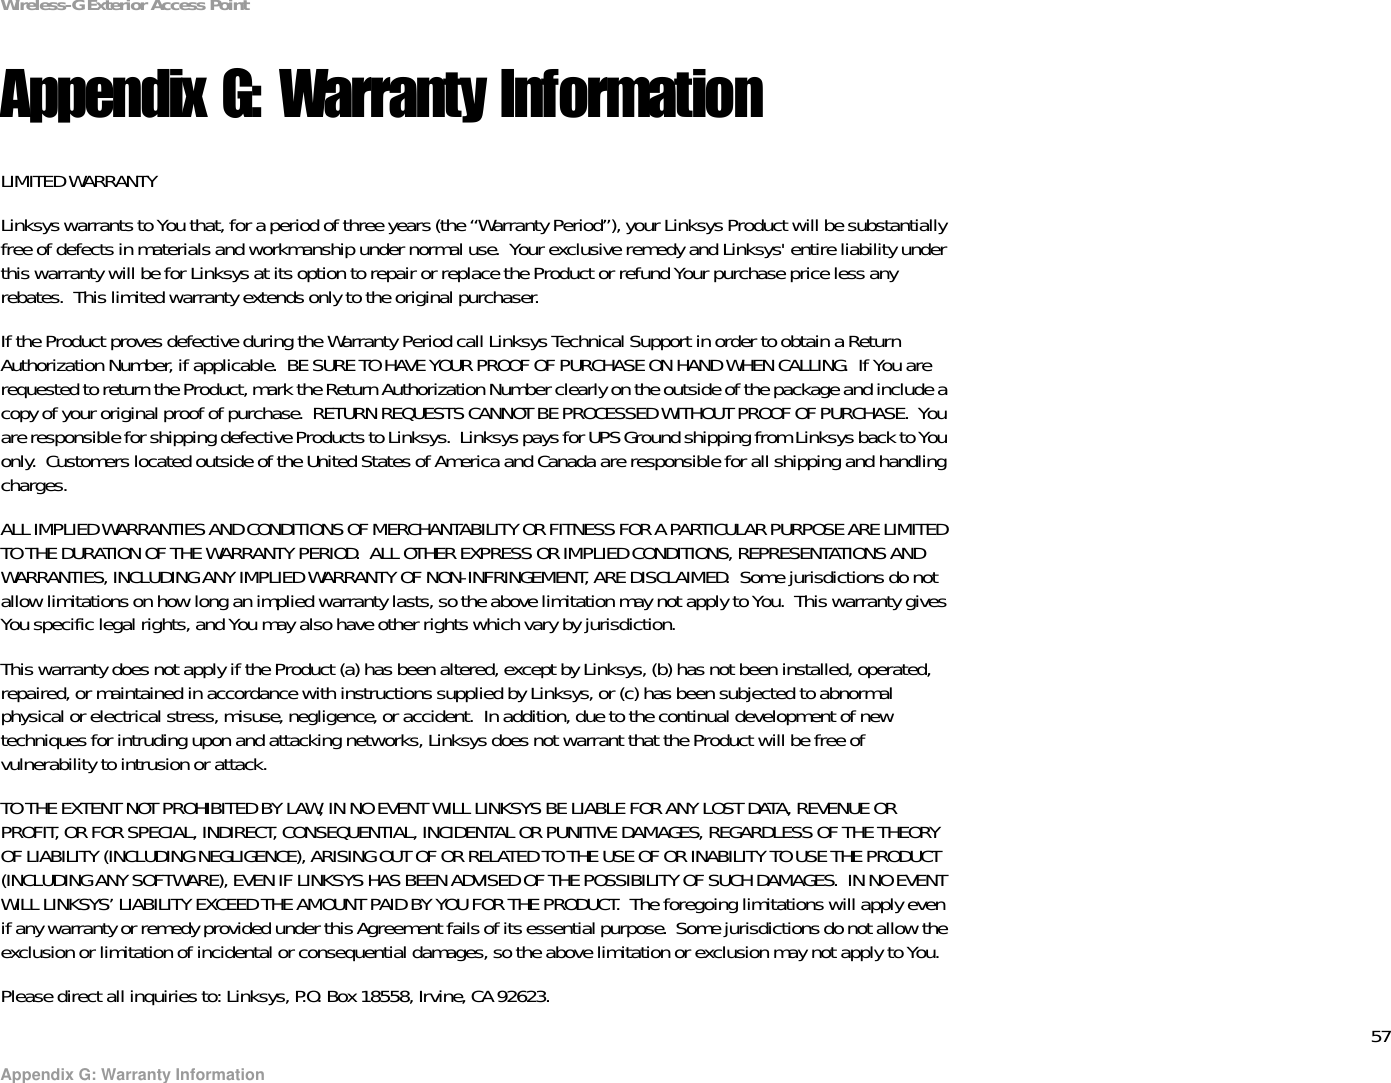 57Appendix G: Warranty InformationWireless-G Exterior Access PointAppendix G: Warranty InformationLIMITED WARRANTYLinksys warrants to You that, for a period of three years (the “Warranty Period”), your Linksys Product will be substantially free of defects in materials and workmanship under normal use.  Your exclusive remedy and Linksys&apos; entire liability under this warranty will be for Linksys at its option to repair or replace the Product or refund Your purchase price less any rebates.  This limited warranty extends only to the original purchaser.  If the Product proves defective during the Warranty Period call Linksys Technical Support in order to obtain a Return Authorization Number, if applicable.  BE SURE TO HAVE YOUR PROOF OF PURCHASE ON HAND WHEN CALLING.  If You are requested to return the Product, mark the Return Authorization Number clearly on the outside of the package and include a copy of your original proof of purchase.  RETURN REQUESTS CANNOT BE PROCESSED WITHOUT PROOF OF PURCHASE.  You are responsible for shipping defective Products to Linksys.  Linksys pays for UPS Ground shipping from Linksys back to You only.  Customers located outside of the United States of America and Canada are responsible for all shipping and handling charges. ALL IMPLIED WARRANTIES AND CONDITIONS OF MERCHANTABILITY OR FITNESS FOR A PARTICULAR PURPOSE ARE LIMITED TO THE DURATION OF THE WARRANTY PERIOD.  ALL OTHER EXPRESS OR IMPLIED CONDITIONS, REPRESENTATIONS AND WARRANTIES, INCLUDING ANY IMPLIED WARRANTY OF NON-INFRINGEMENT, ARE DISCLAIMED.  Some jurisdictions do not allow limitations on how long an implied warranty lasts, so the above limitation may not apply to You.  This warranty gives You specific legal rights, and You may also have other rights which vary by jurisdiction.This warranty does not apply if the Product (a) has been altered, except by Linksys, (b) has not been installed, operated, repaired, or maintained in accordance with instructions supplied by Linksys, or (c) has been subjected to abnormal physical or electrical stress, misuse, negligence, or accident.  In addition, due to the continual development of new techniques for intruding upon and attacking networks, Linksys does not warrant that the Product will be free of vulnerability to intrusion or attack.TO THE EXTENT NOT PROHIBITED BY LAW, IN NO EVENT WILL LINKSYS BE LIABLE FOR ANY LOST DATA, REVENUE OR PROFIT, OR FOR SPECIAL, INDIRECT, CONSEQUENTIAL, INCIDENTAL OR PUNITIVE DAMAGES, REGARDLESS OF THE THEORY OF LIABILITY (INCLUDING NEGLIGENCE), ARISING OUT OF OR RELATED TO THE USE OF OR INABILITY TO USE THE PRODUCT (INCLUDING ANY SOFTWARE), EVEN IF LINKSYS HAS BEEN ADVISED OF THE POSSIBILITY OF SUCH DAMAGES.  IN NO EVENT WILL LINKSYS’ LIABILITY EXCEED THE AMOUNT PAID BY YOU FOR THE PRODUCT.  The foregoing limitations will apply even if any warranty or remedy provided under this Agreement fails of its essential purpose.  Some jurisdictions do not allow the exclusion or limitation of incidental or consequential damages, so the above limitation or exclusion may not apply to You.Please direct all inquiries to: Linksys, P.O. Box 18558, Irvine, CA 92623.